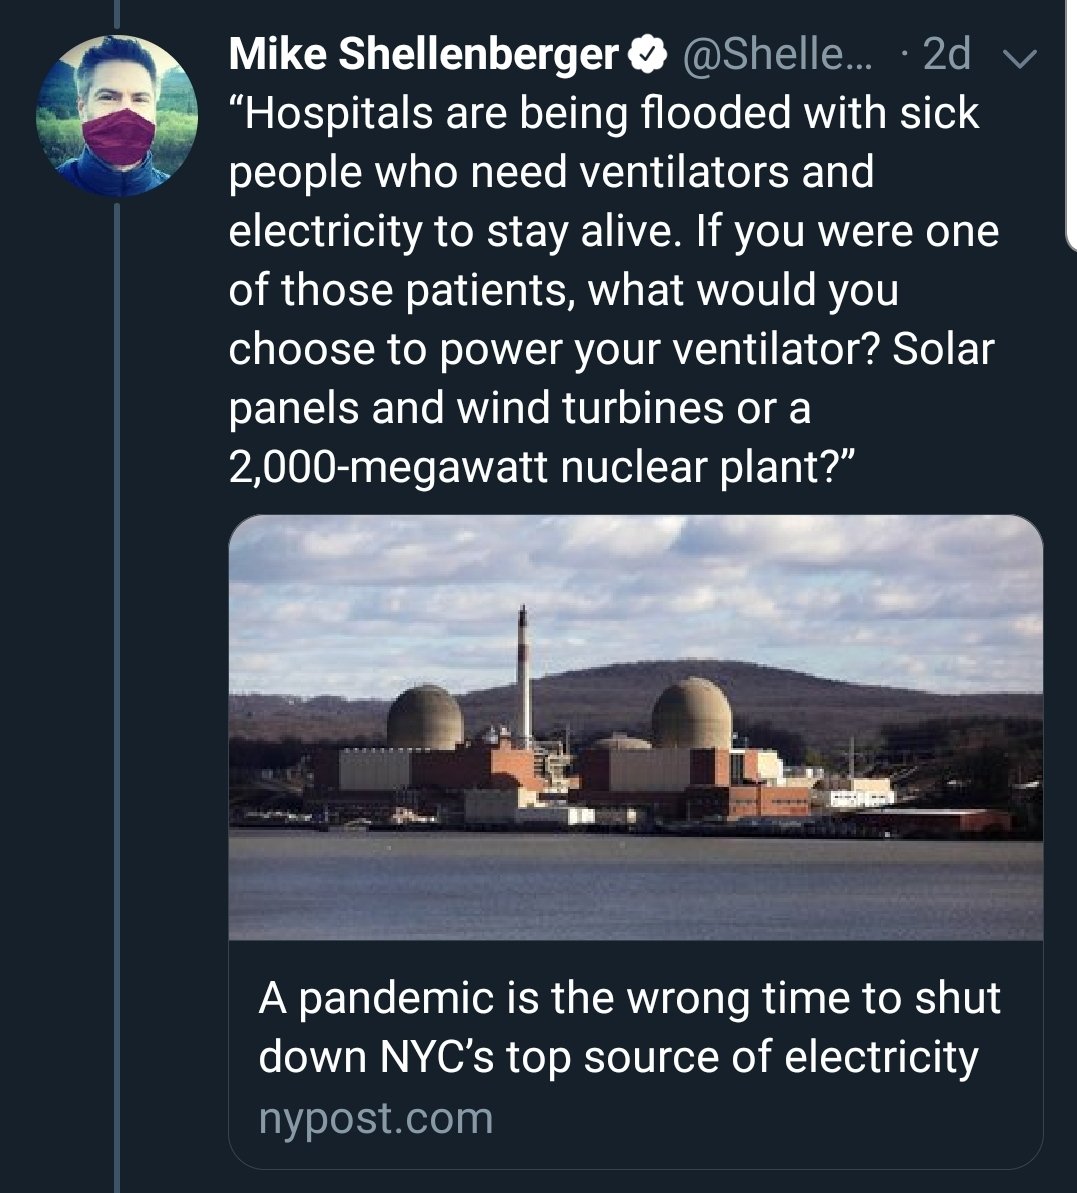 Framing the discussion this way is one of the reasons people hate nuclear bros. Seriously, I can't even fault people for liking the nuclear community less after tweets like this, which I see far too often